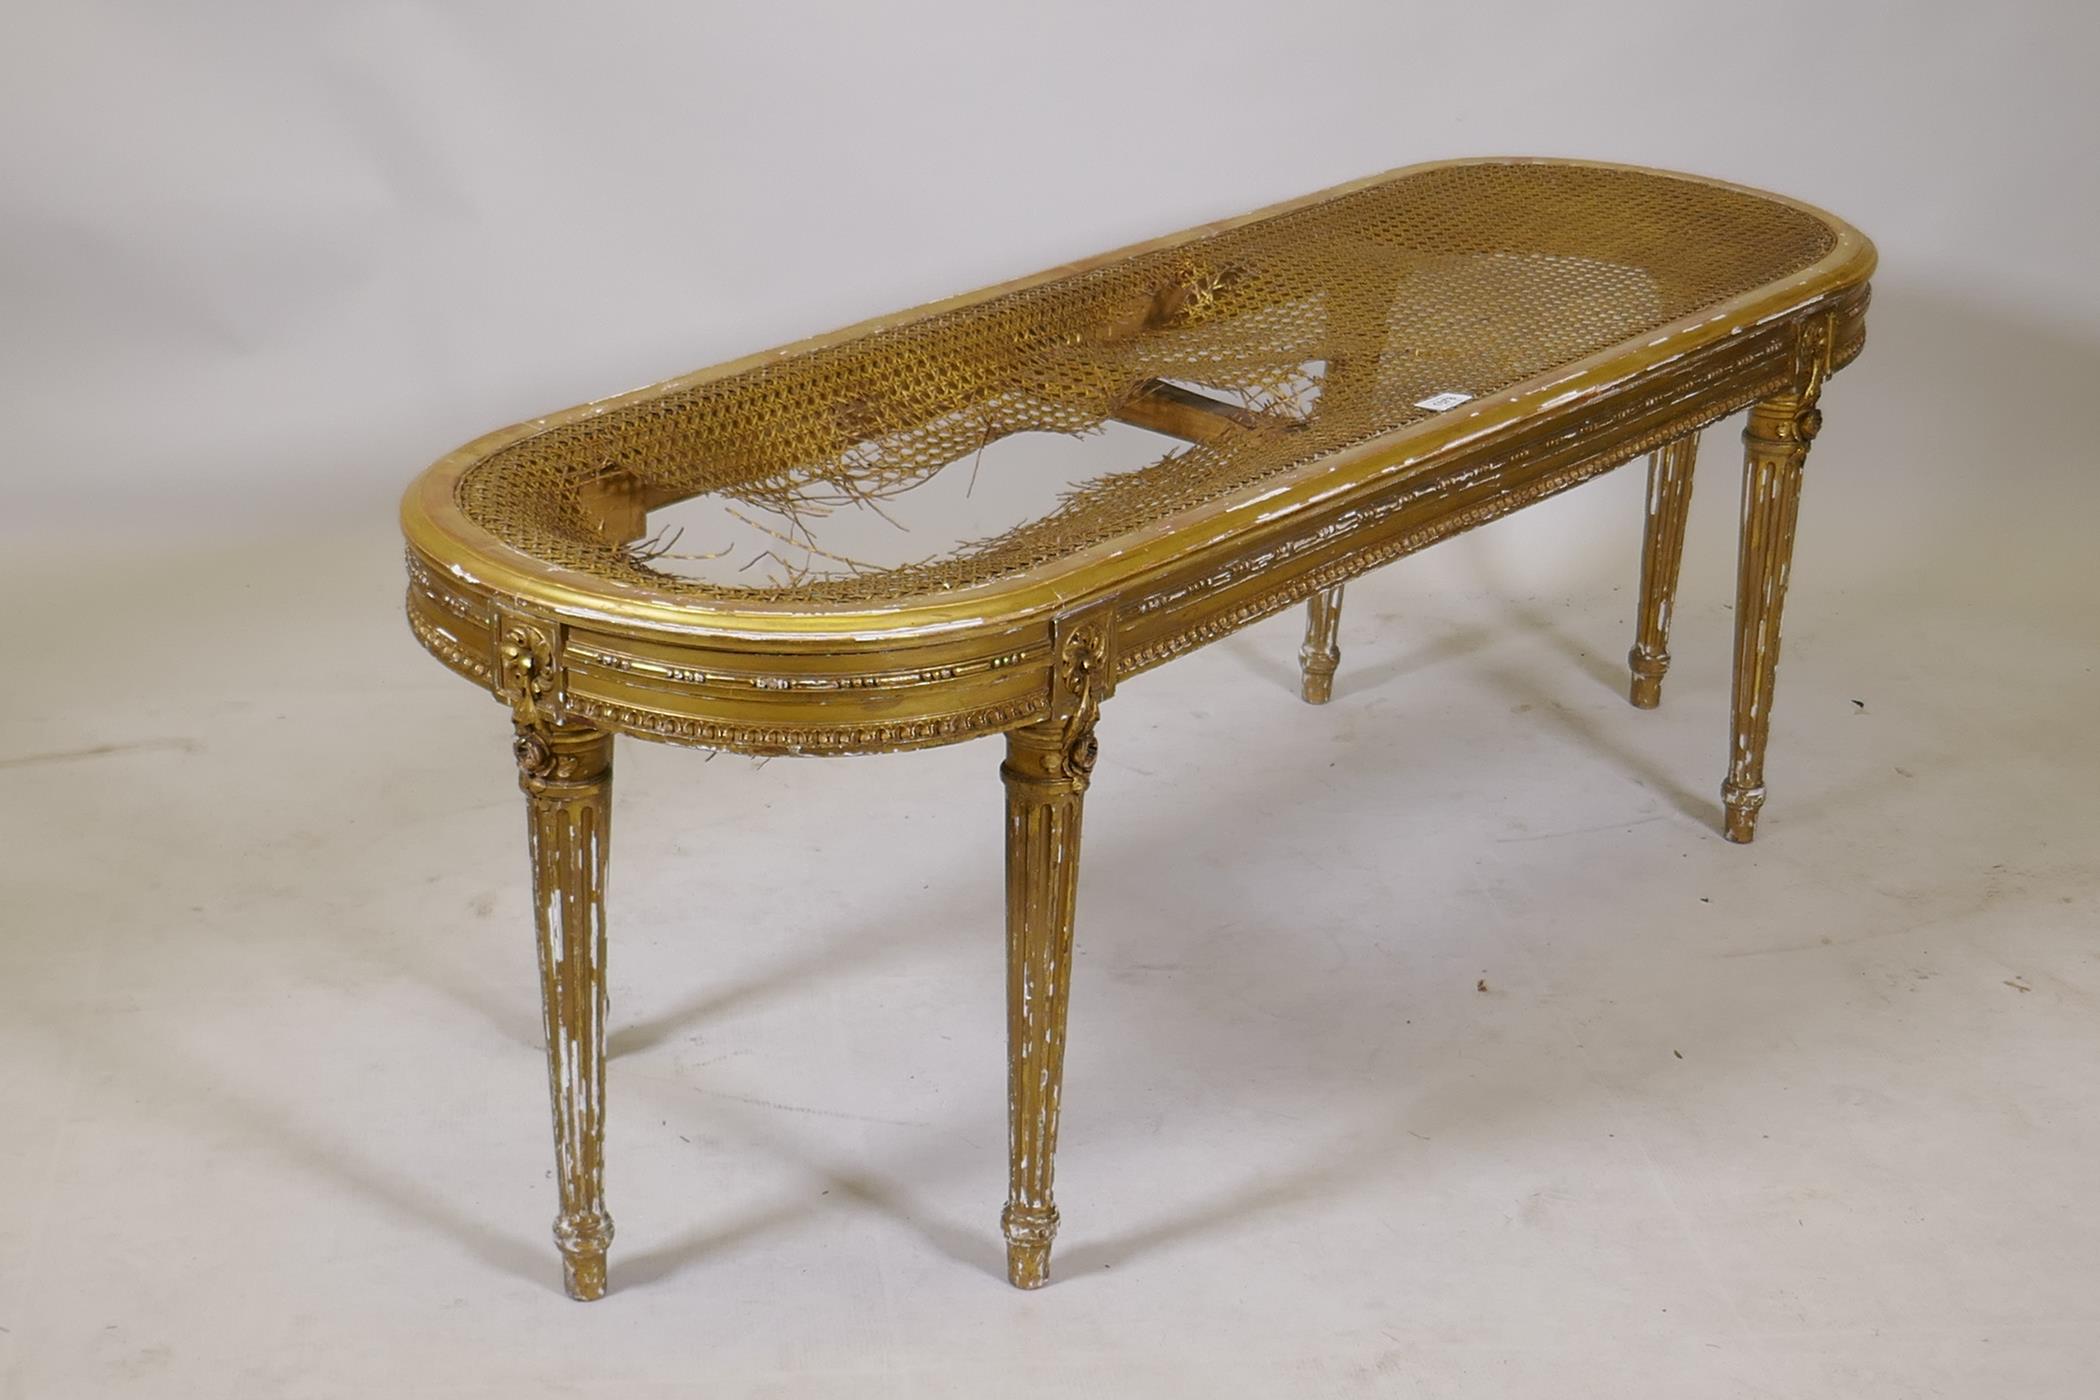 A C19th gilt wood window seat with oval cane top on six fluted supports, cane AF, 45 x 132 x 43cms - Image 3 of 3